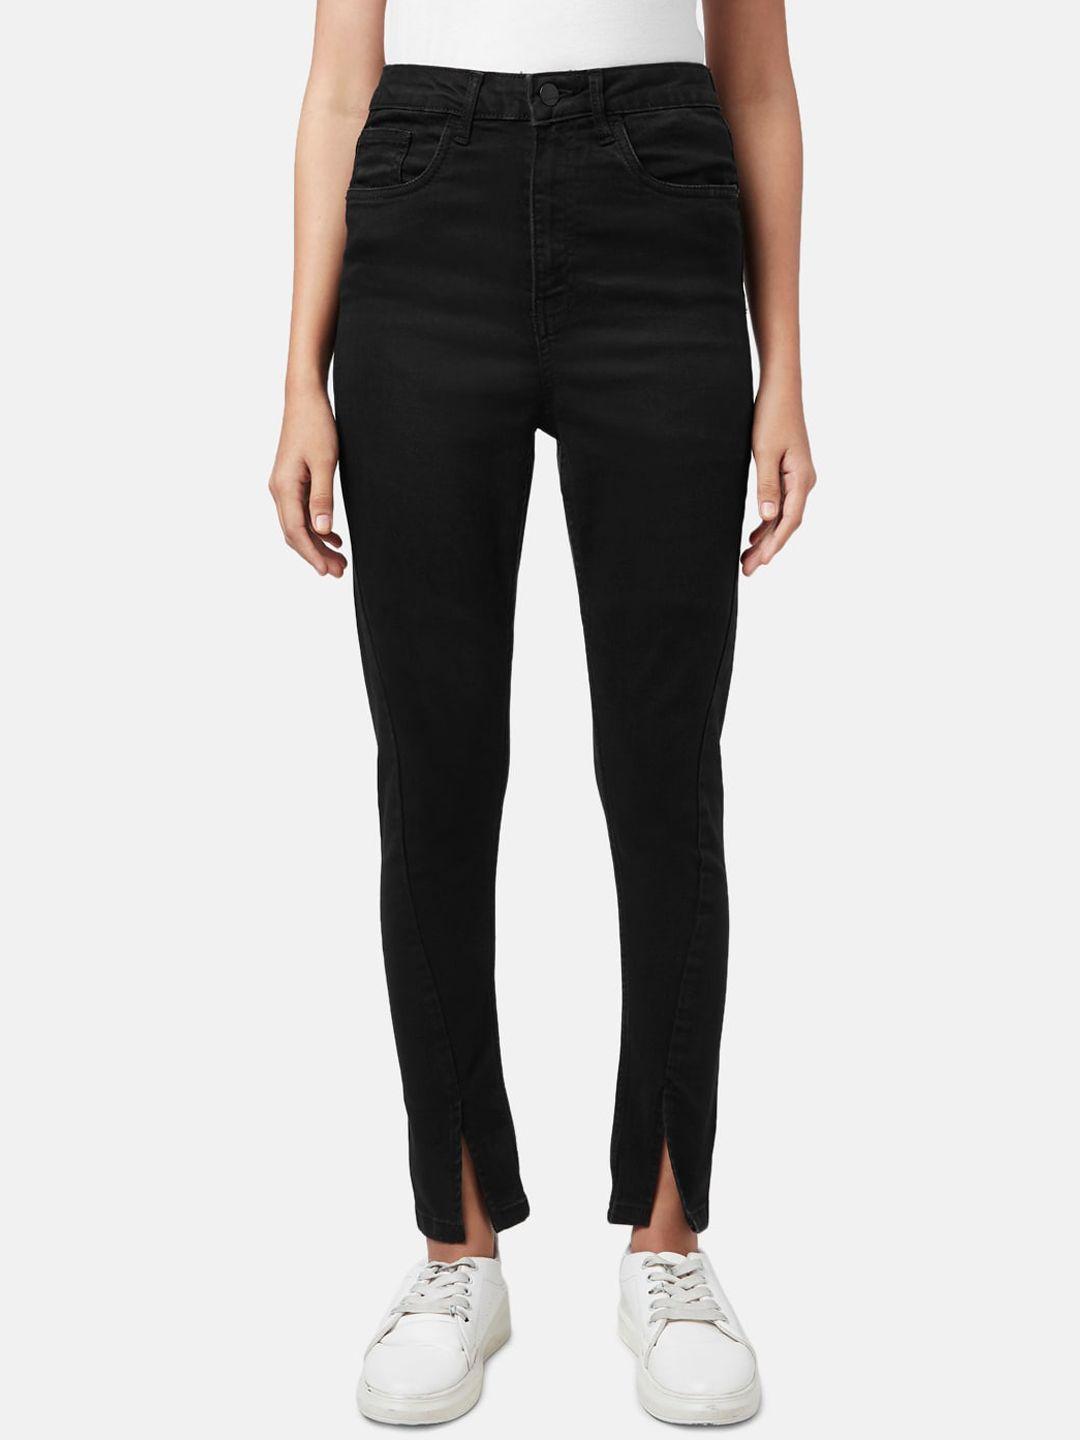 sf jeans by pantaloons women skinny fit jeans